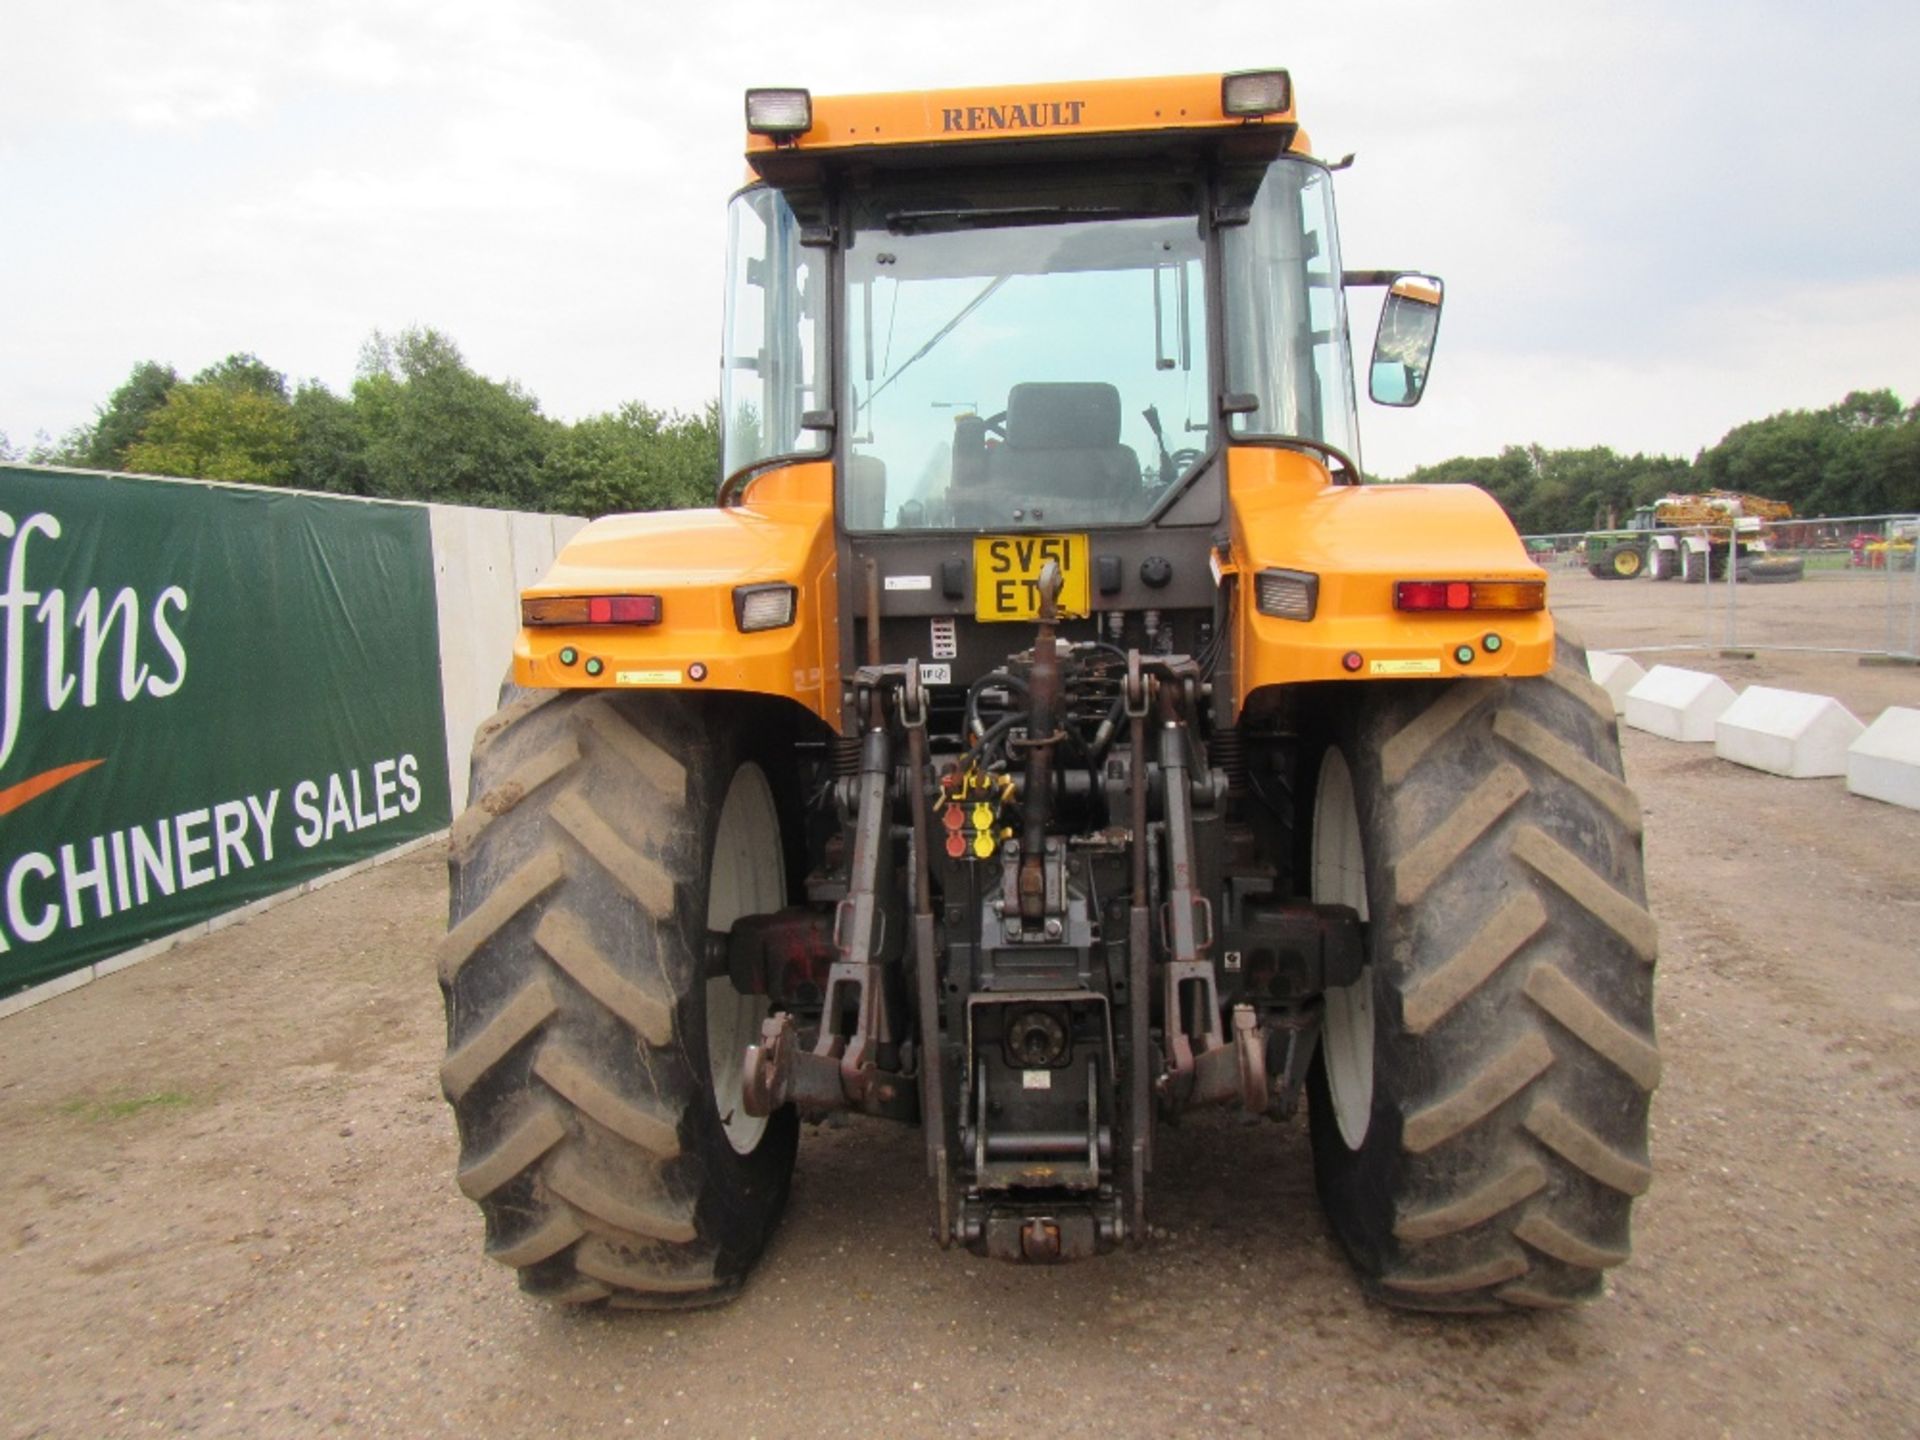 Renault Ares 815 RZ Tractor with Chilton MX120 Loader & Cab Suspension. Reg. No. SV51 ETL - Image 7 of 16